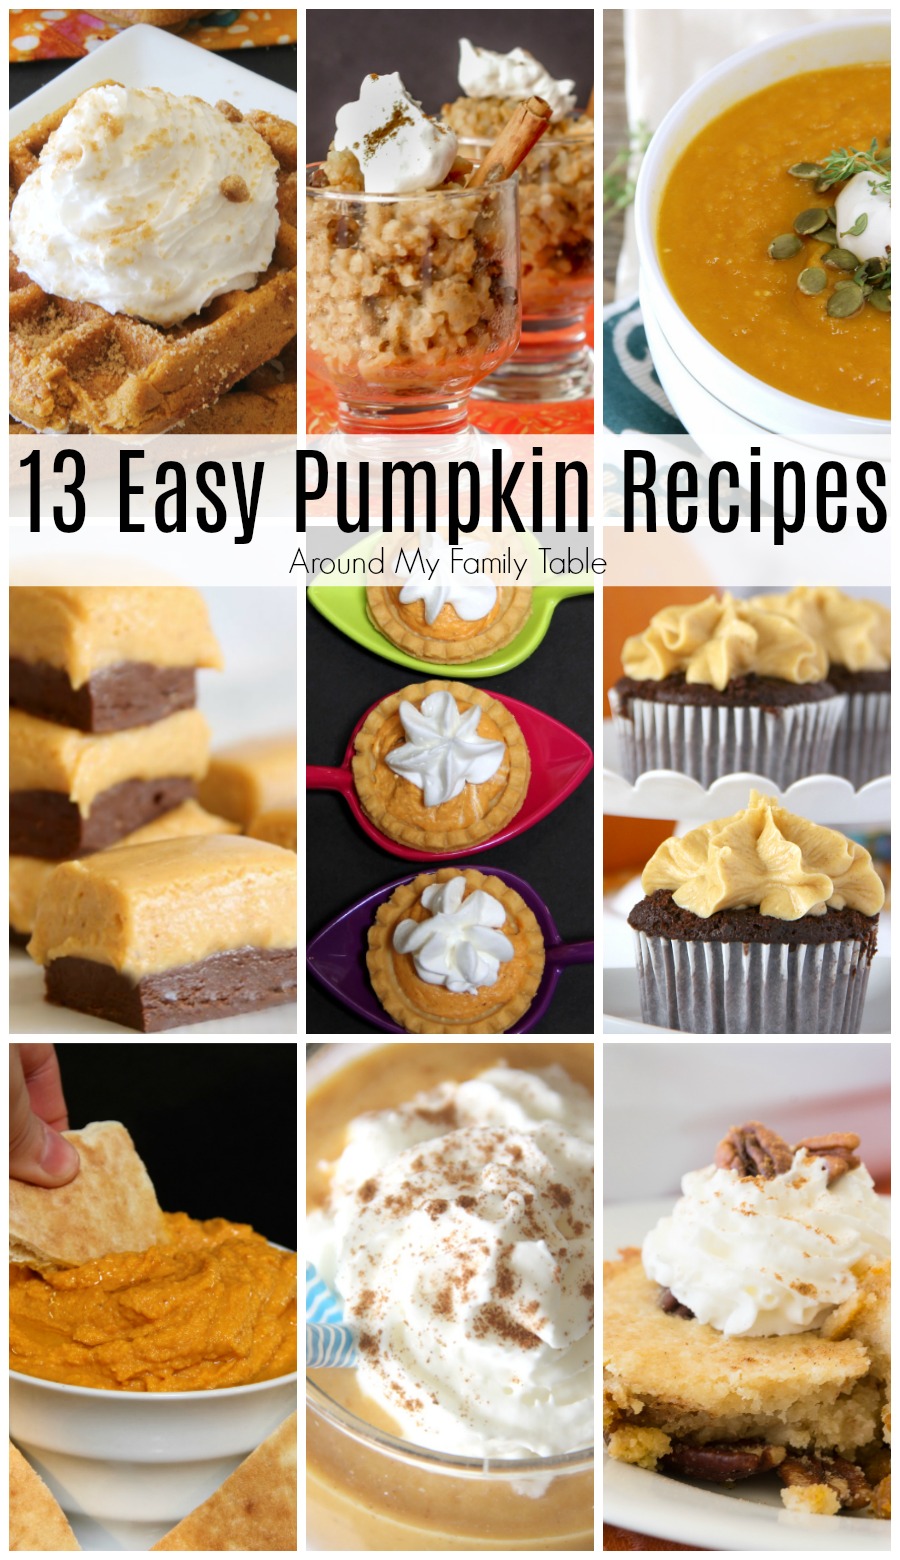 Fall is pumpkin season!! Looking for a way to use more pumpkin this autumn? Check out these easy pumpkin recipes that will blow your mind.